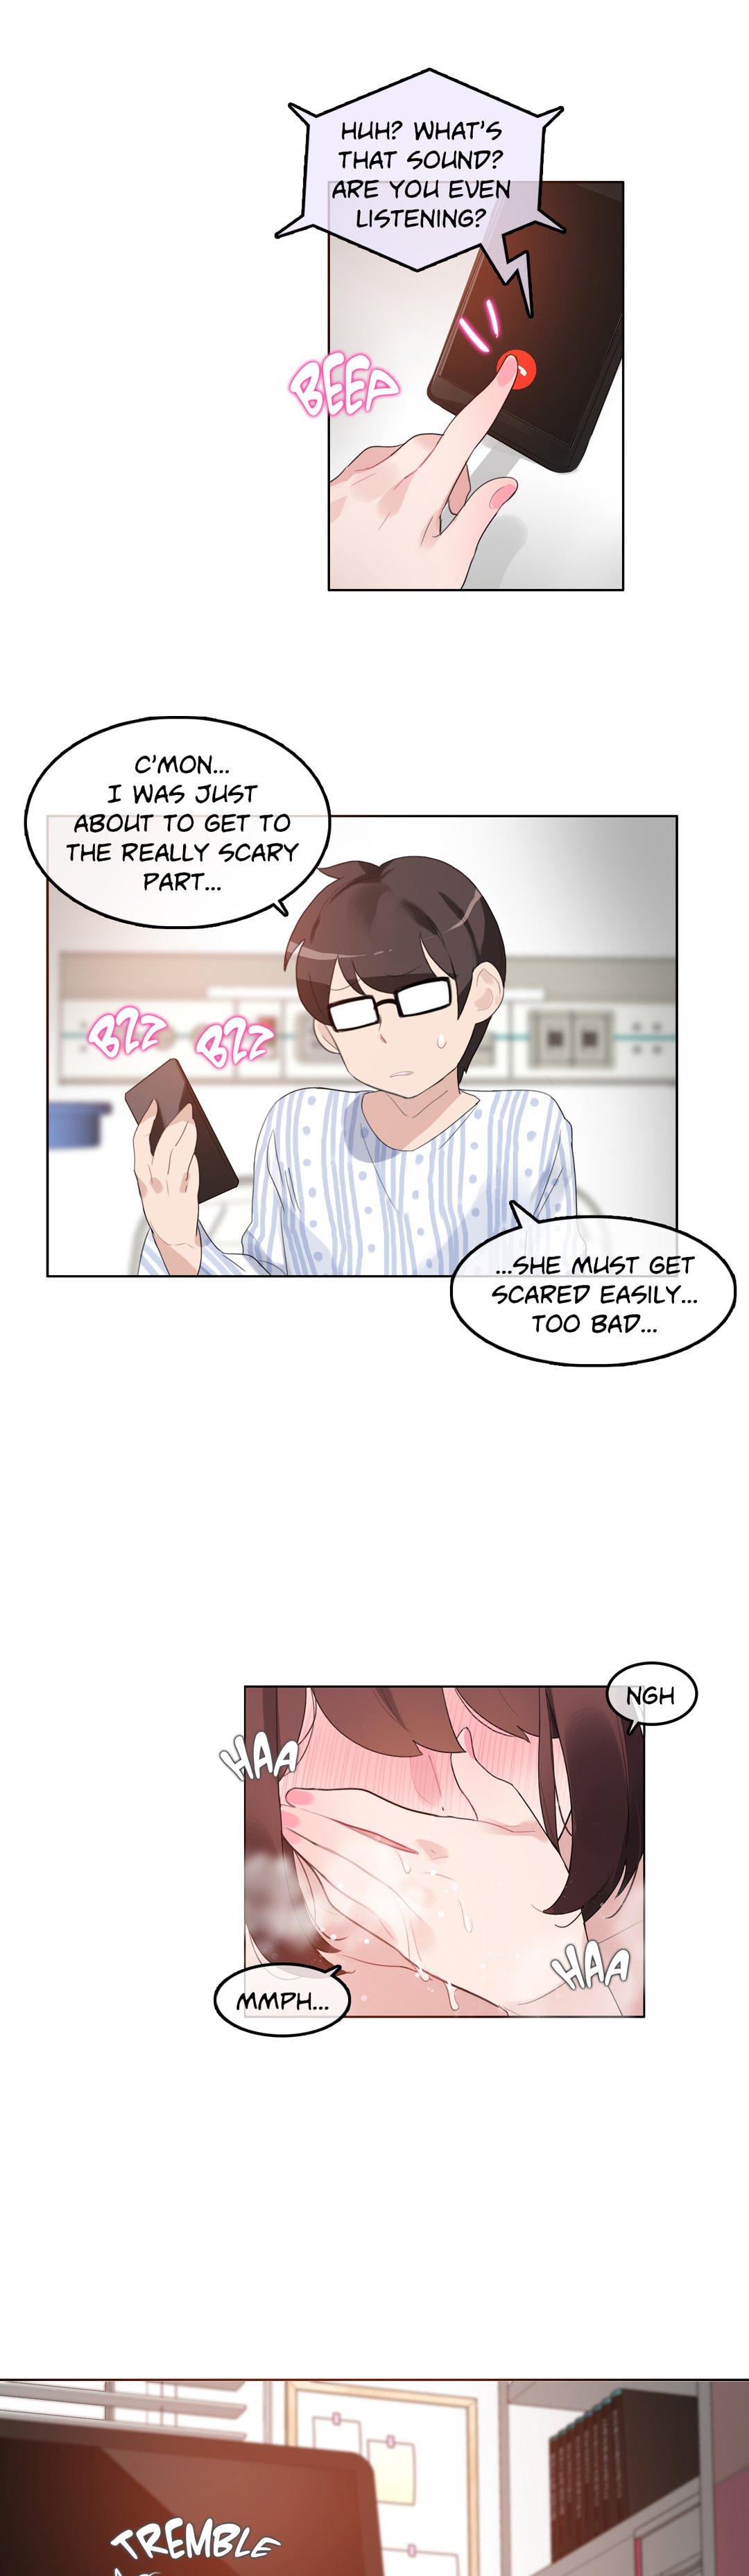 A Pervert's Daily Life • Chapter 46-50 39